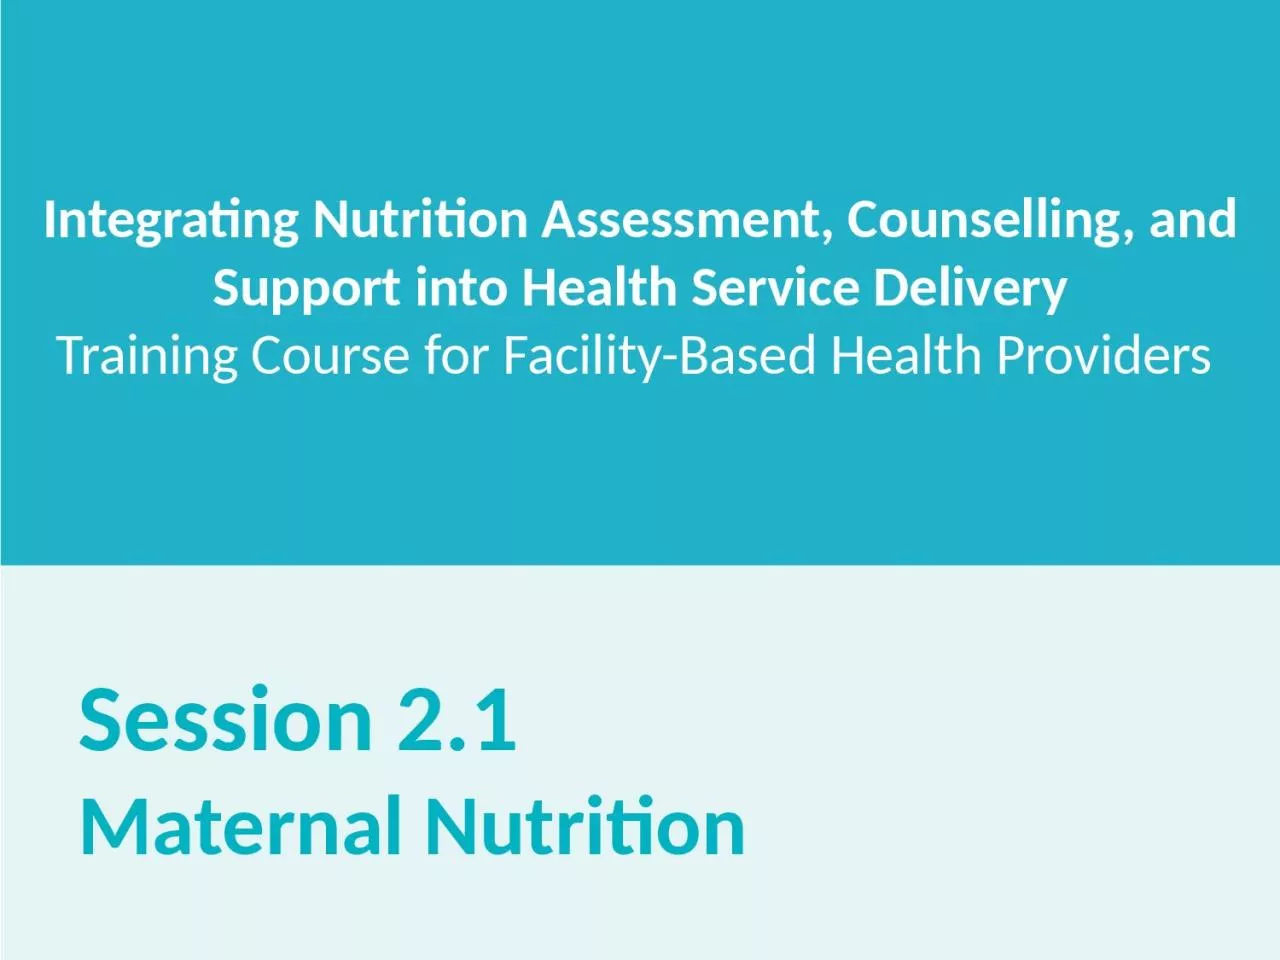 . Session 2.1 Maternal Nutrition